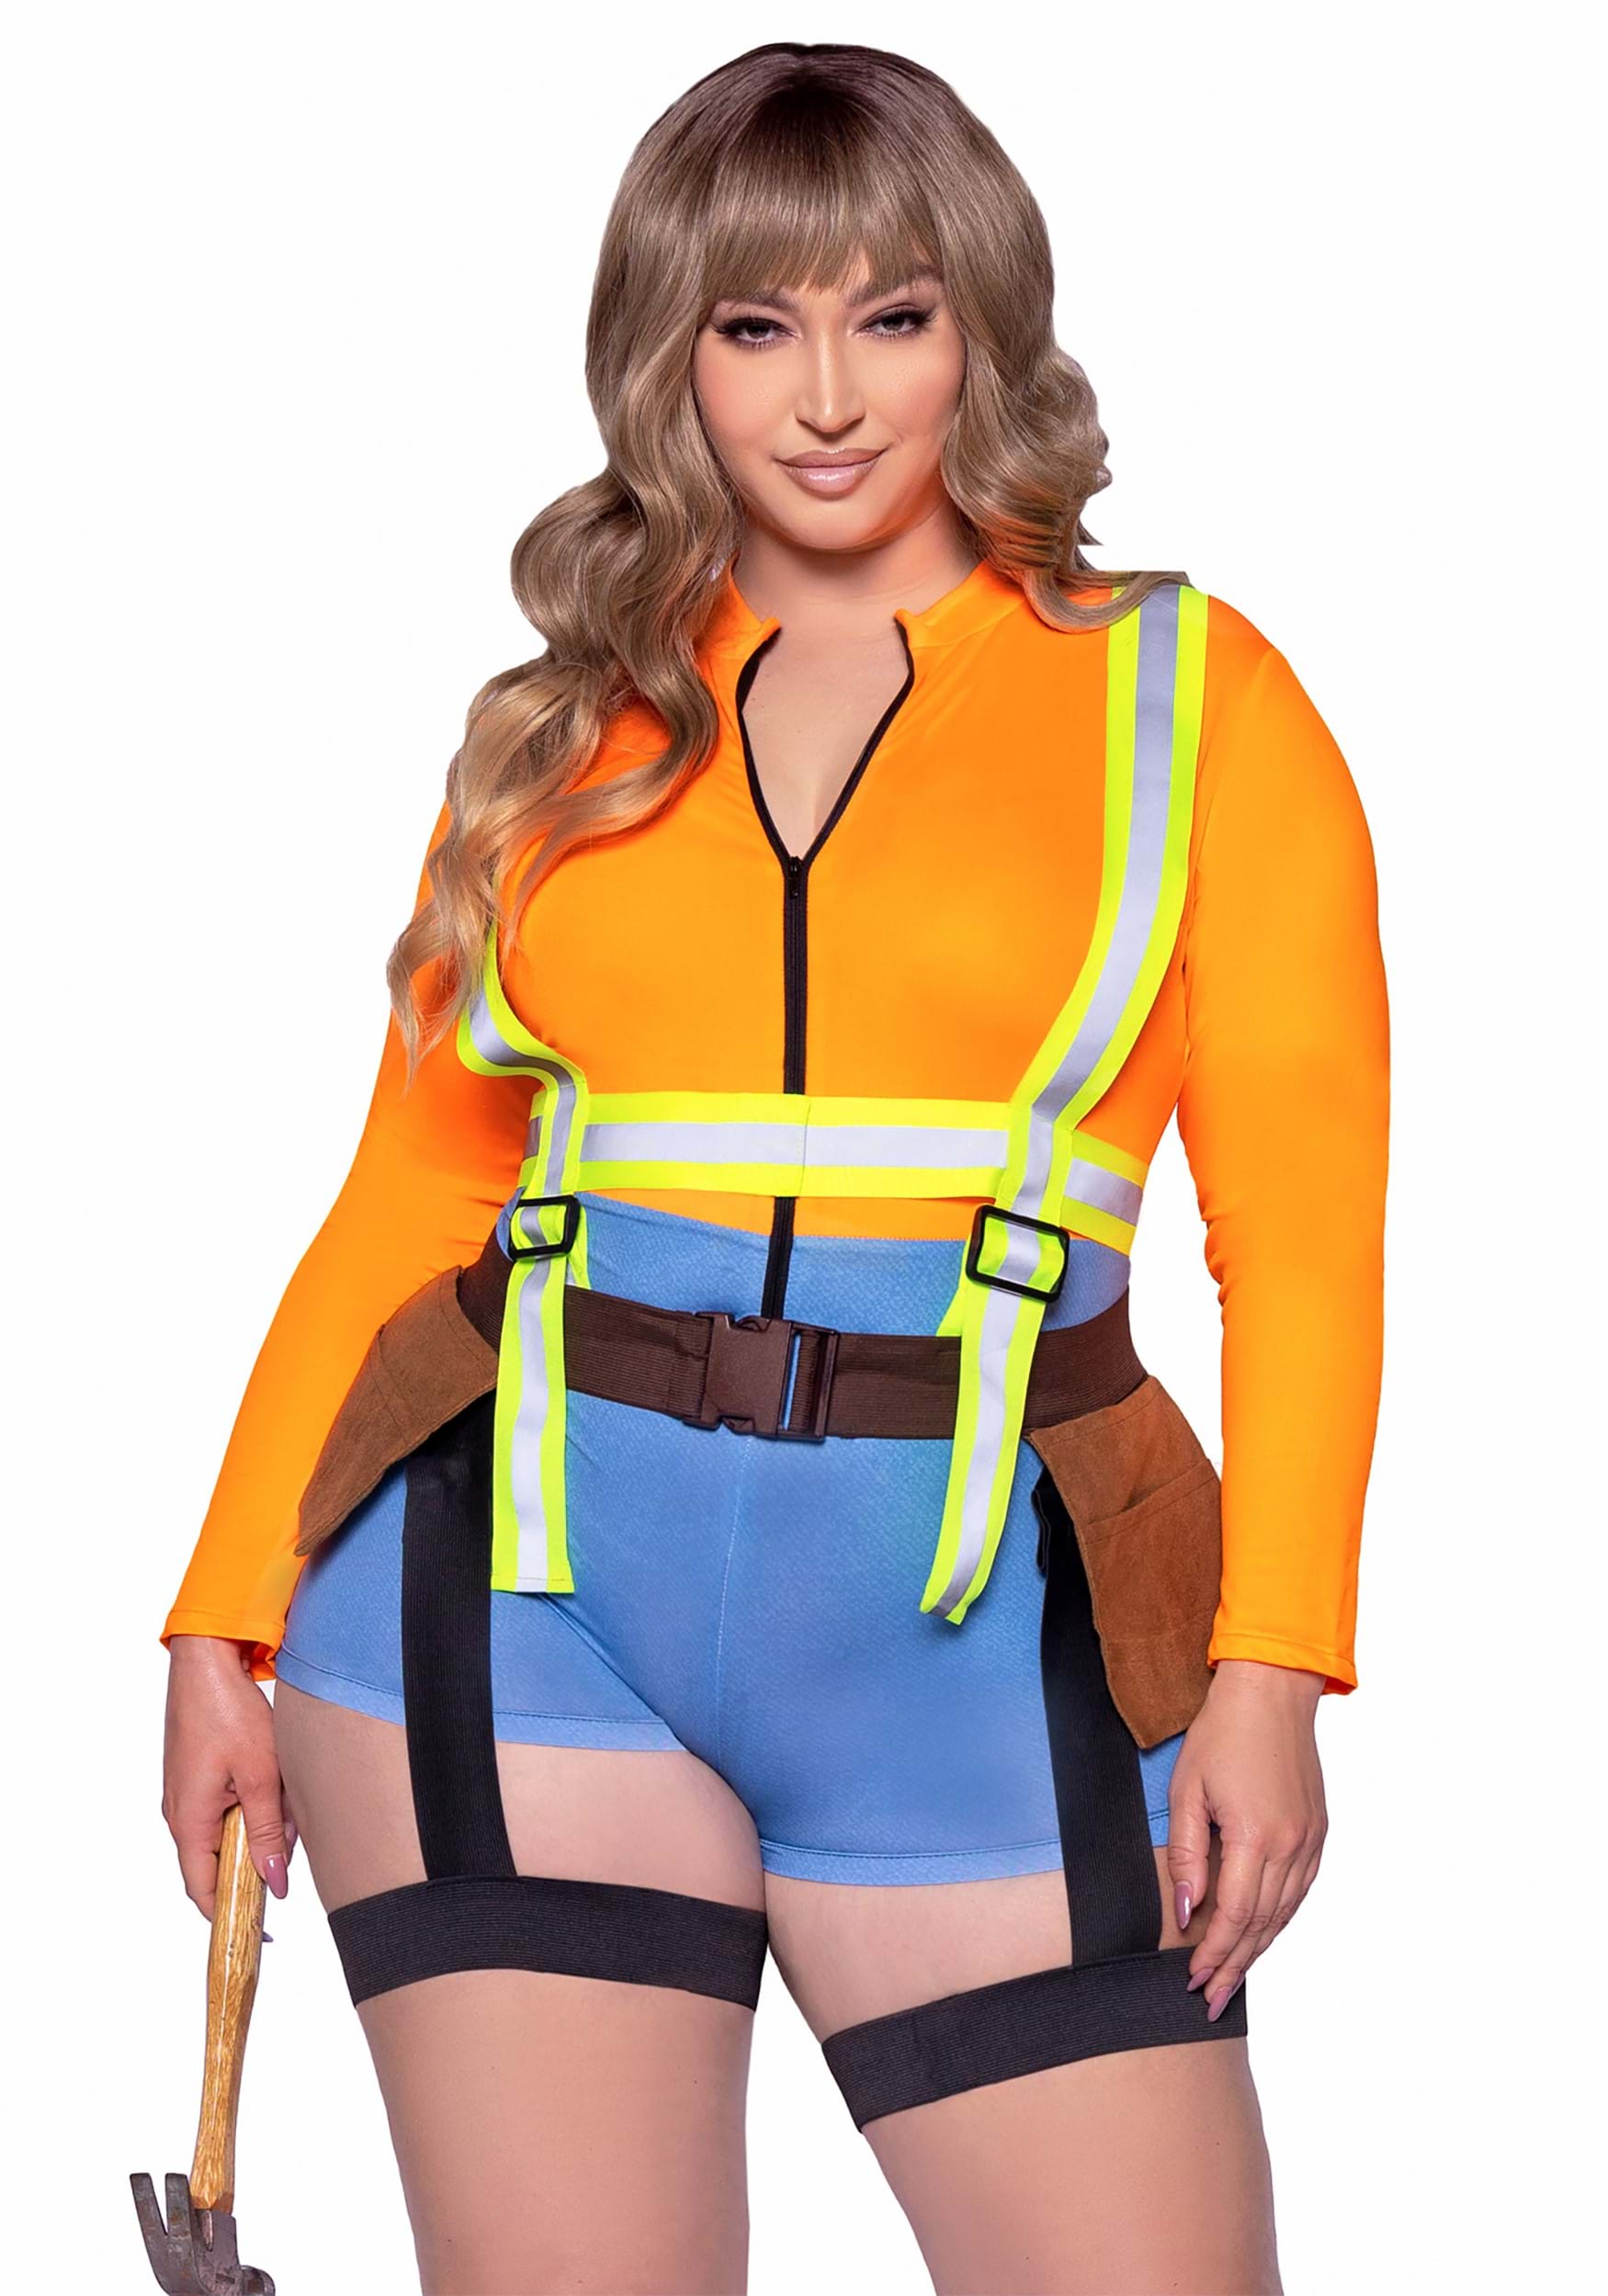 https://images.halloweencostumes.ca/products/82804/1-1/womens-plus-size-construction-worker-costume.jpg